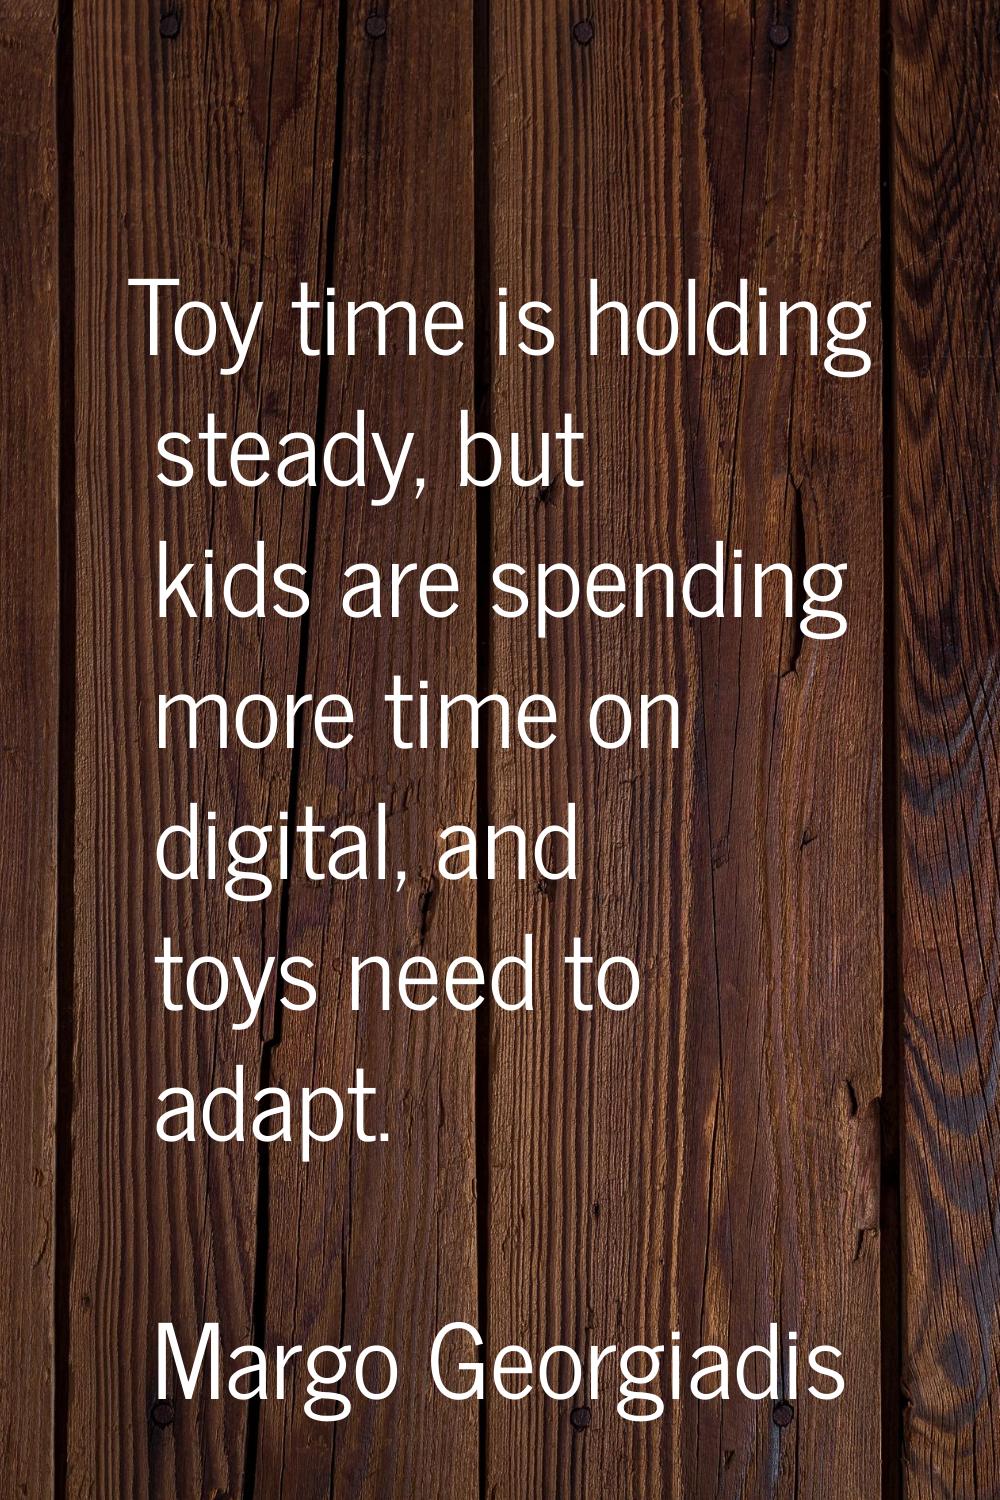 Toy time is holding steady, but kids are spending more time on digital, and toys need to adapt.